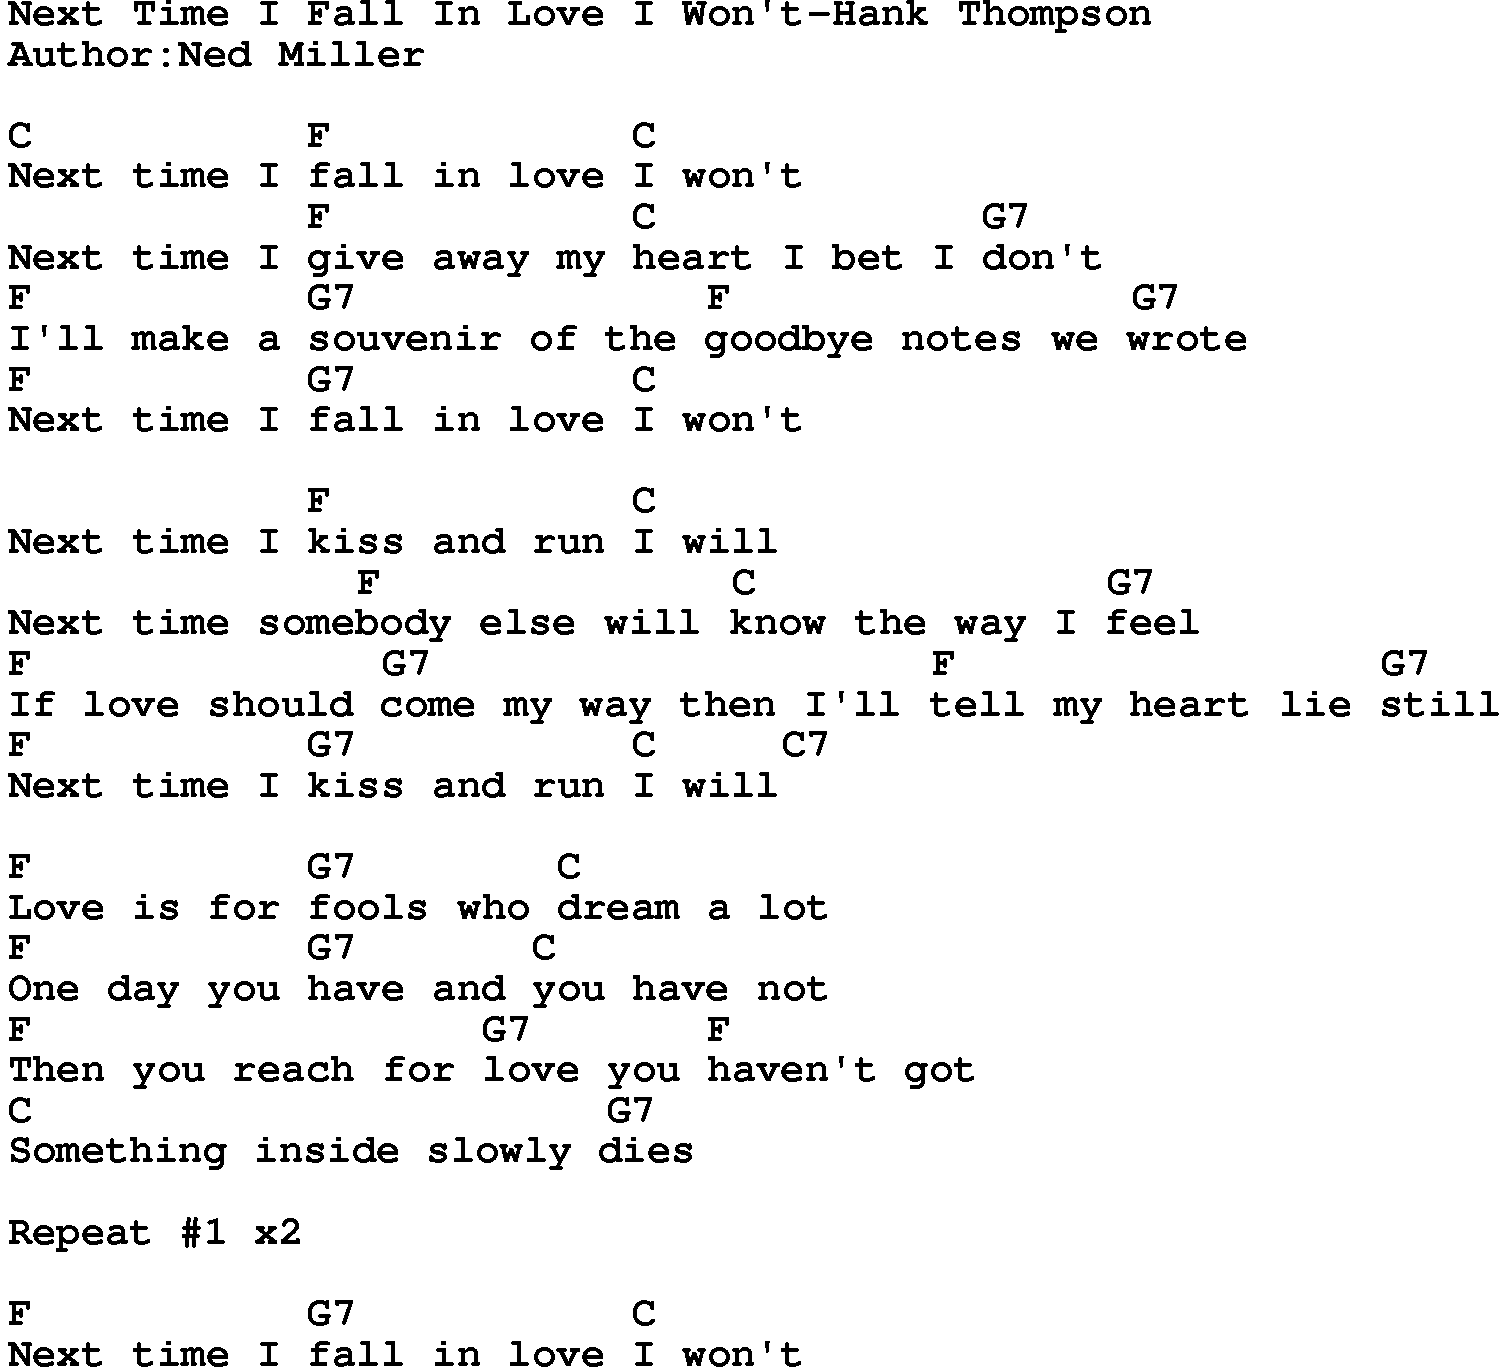 Country music song: Next Time I Fall In Love I Won't-Hank Thompson lyrics and chords